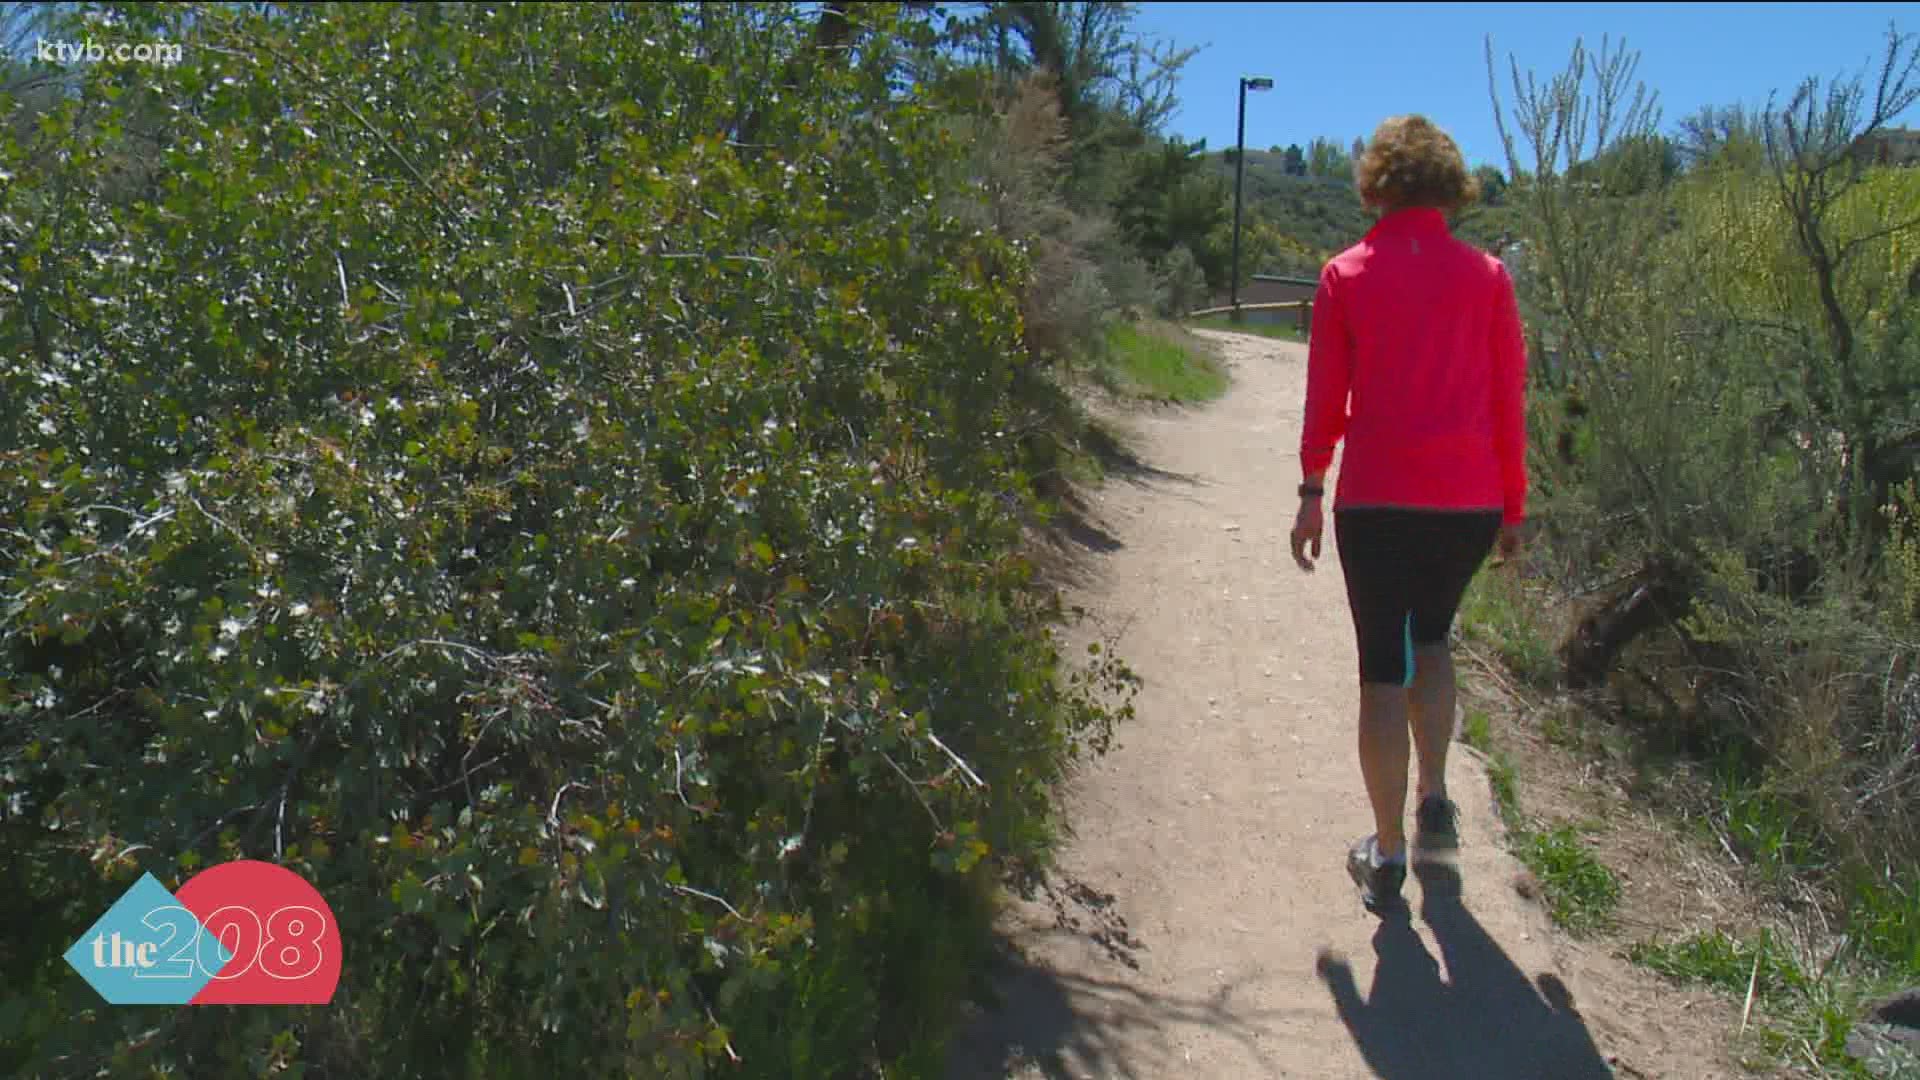 The city is launching a pilot program that effects both hikers and bikers on four popular trails in the foothills.